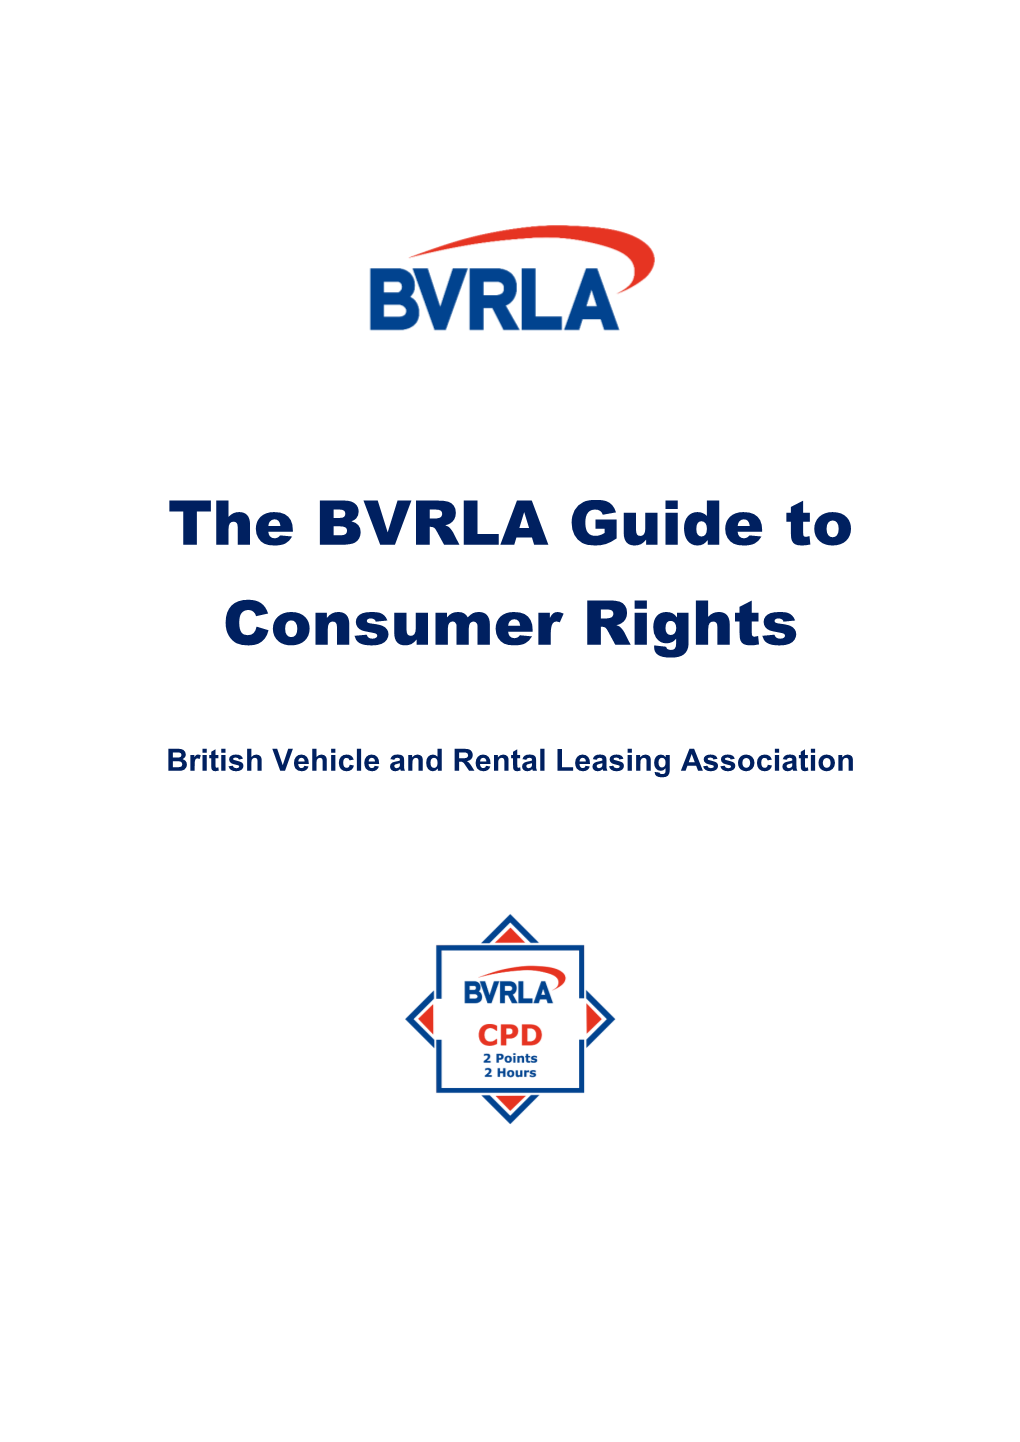 The BVRLA Guide to Consumer Rights